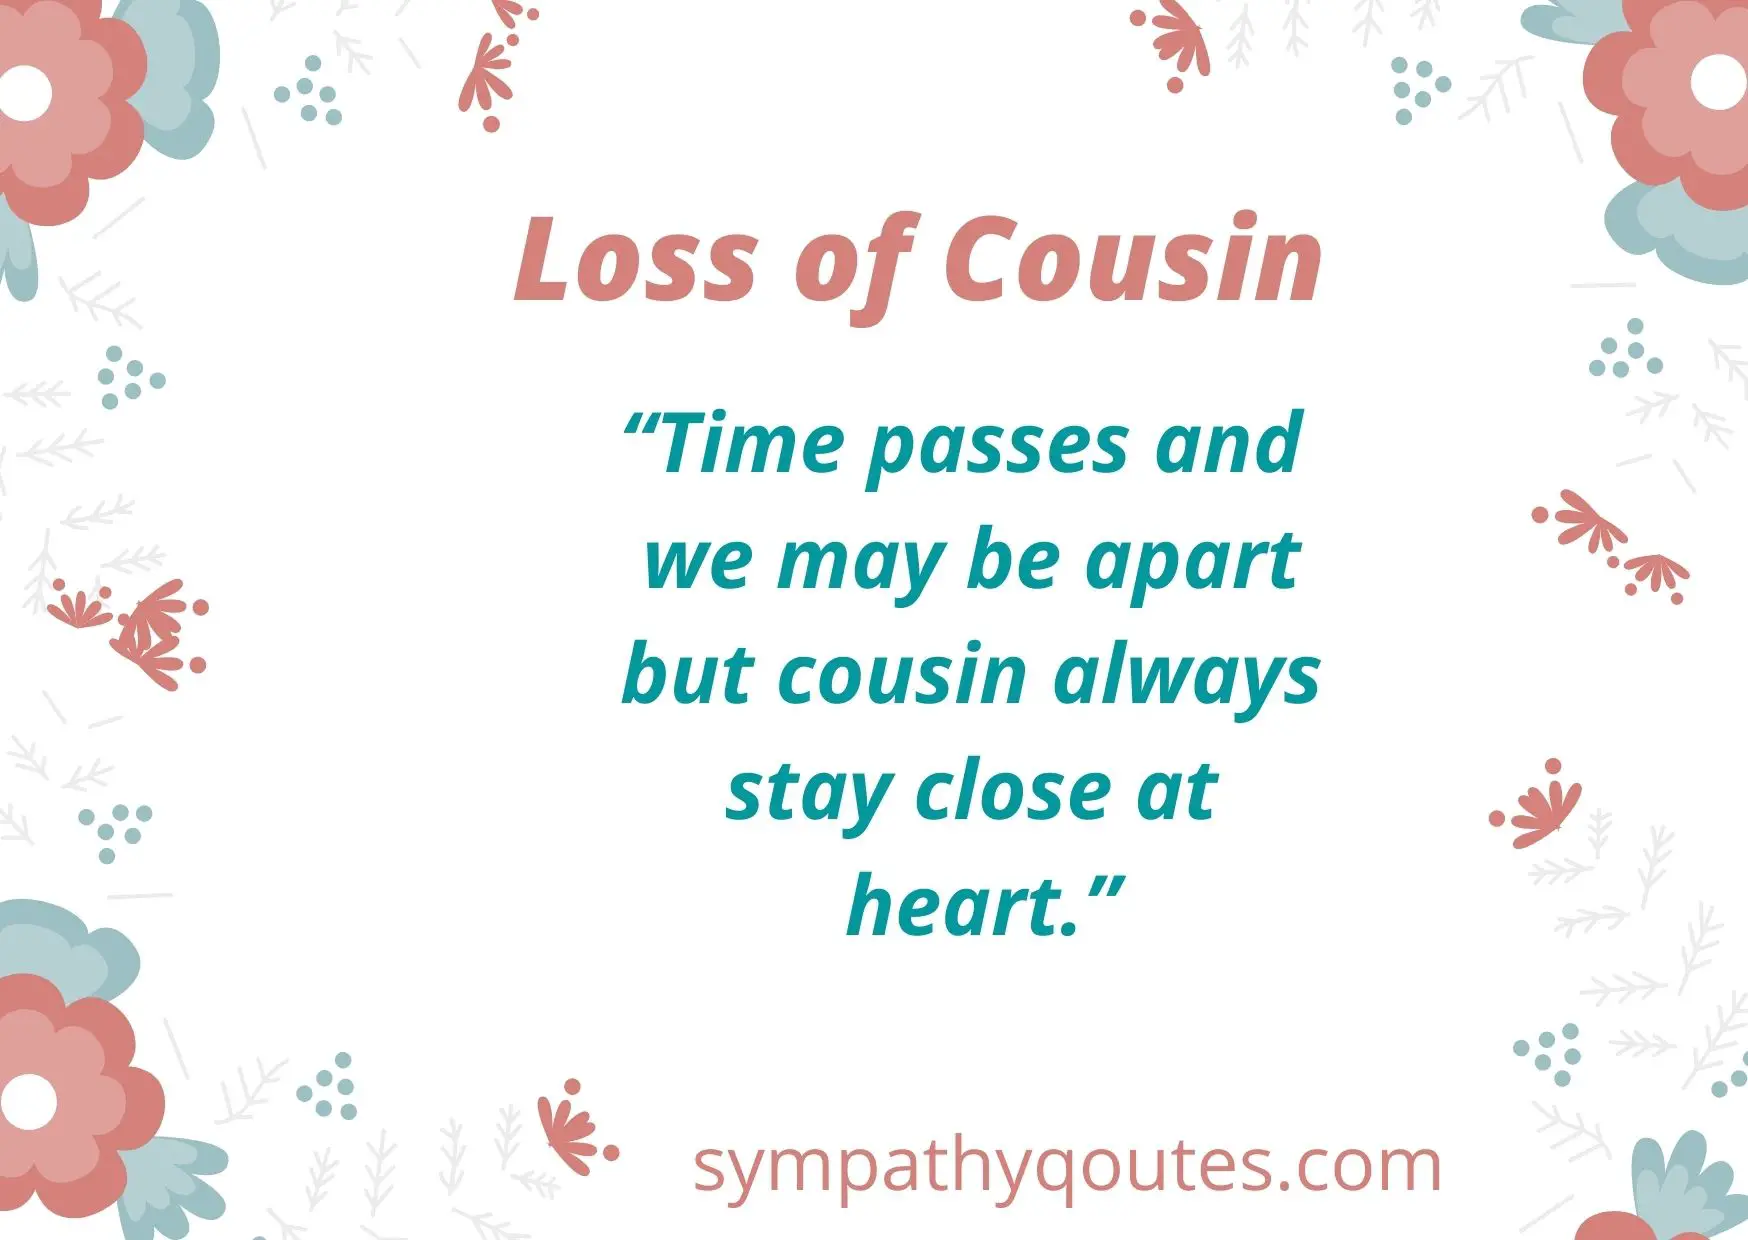 Sympathy Quotes for Loss of Cousin